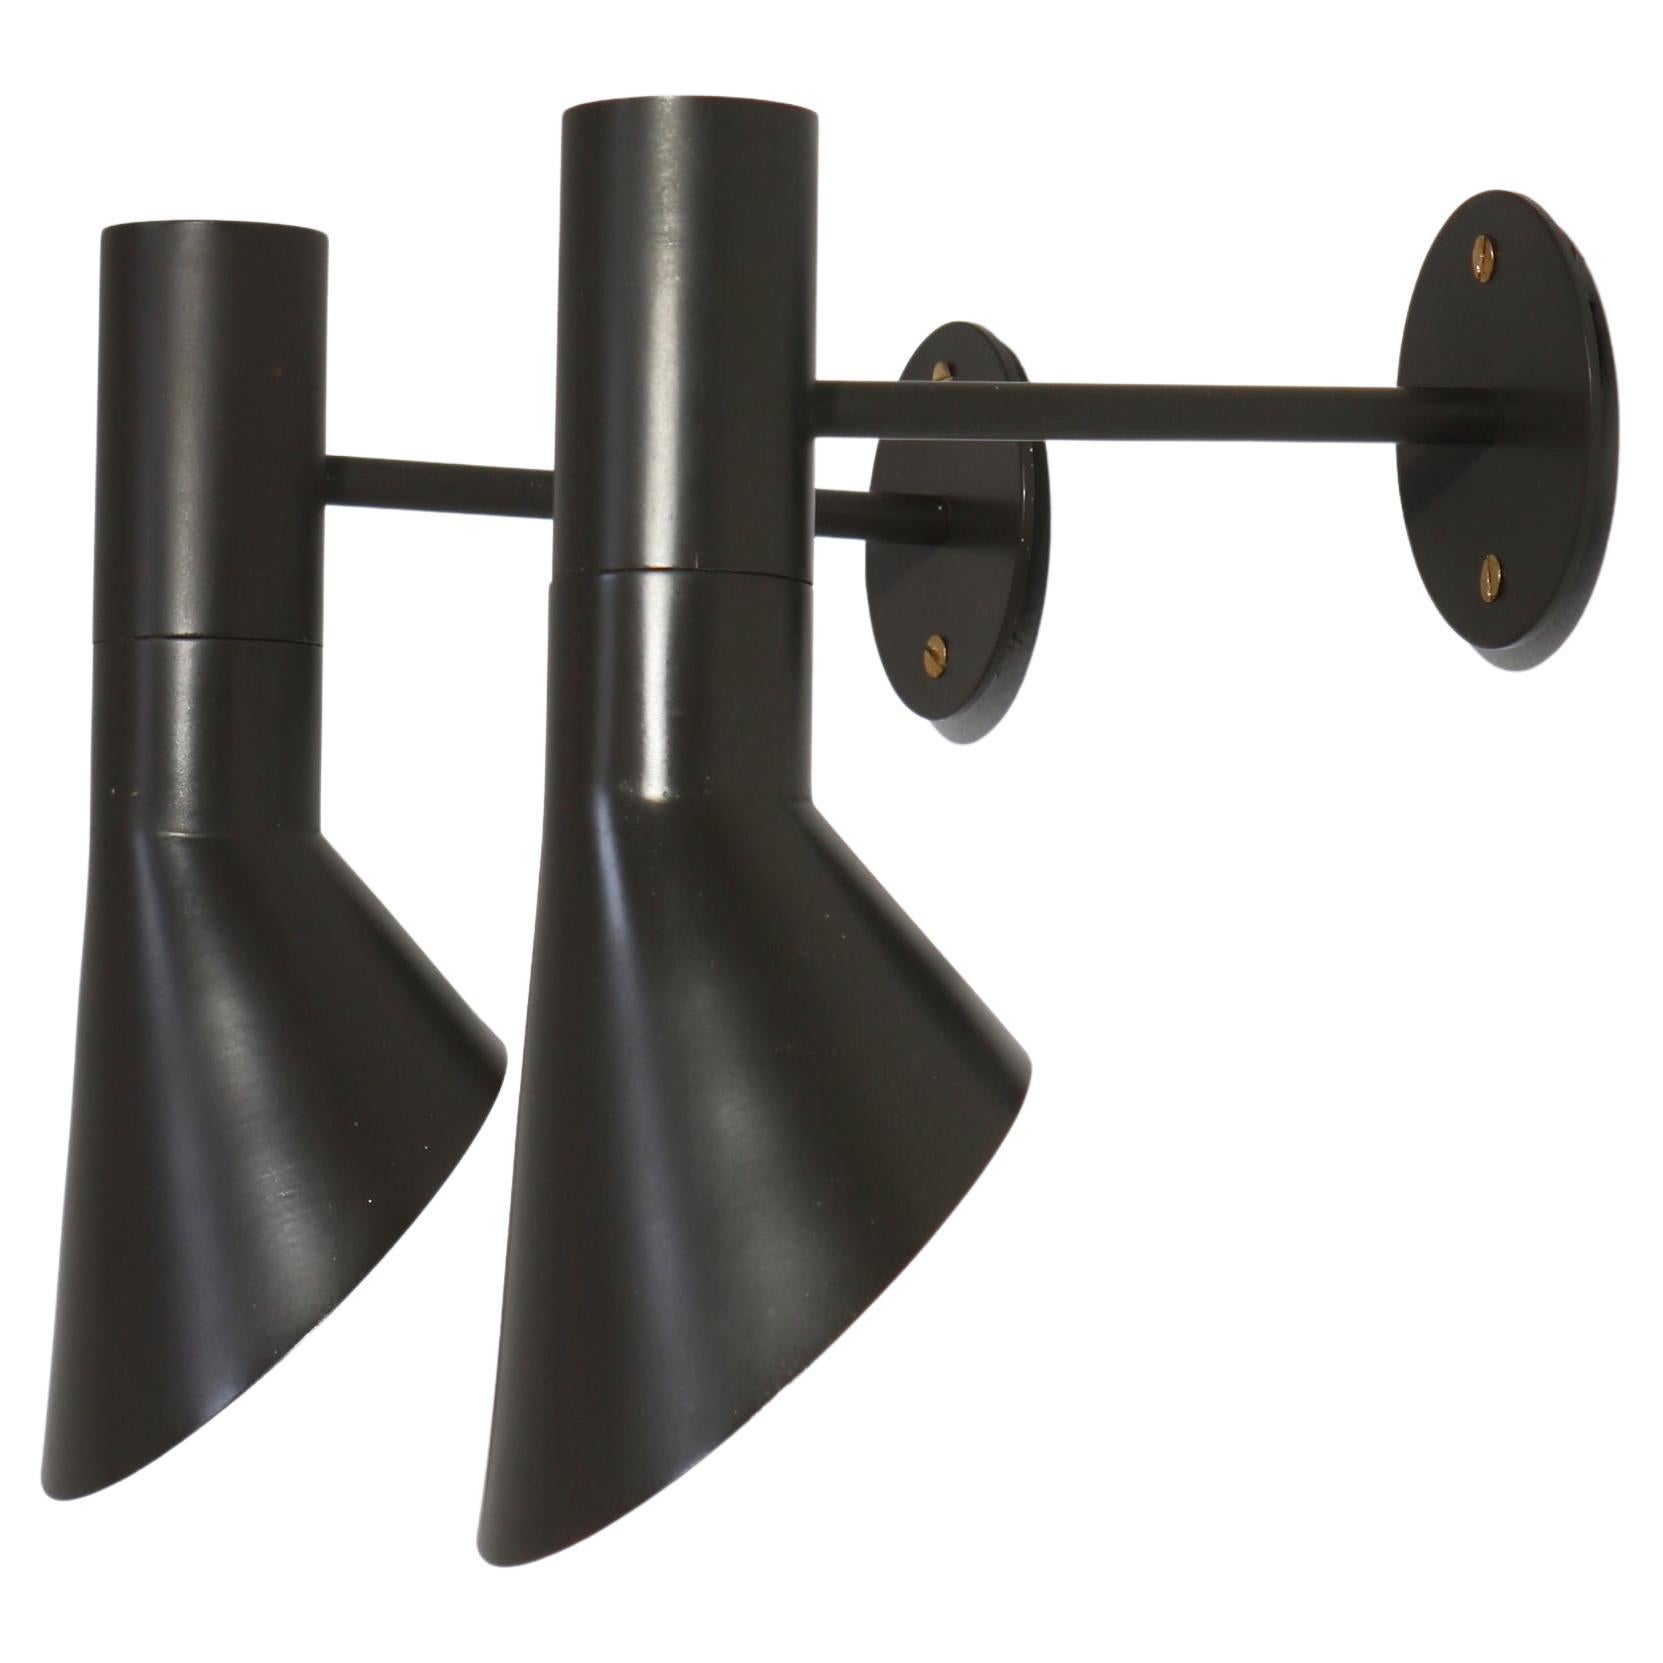 Early Arne Jacobsen Visor Wall Lamps Dark Brown Lacquer Louis Poulsen, 1957 For Sale